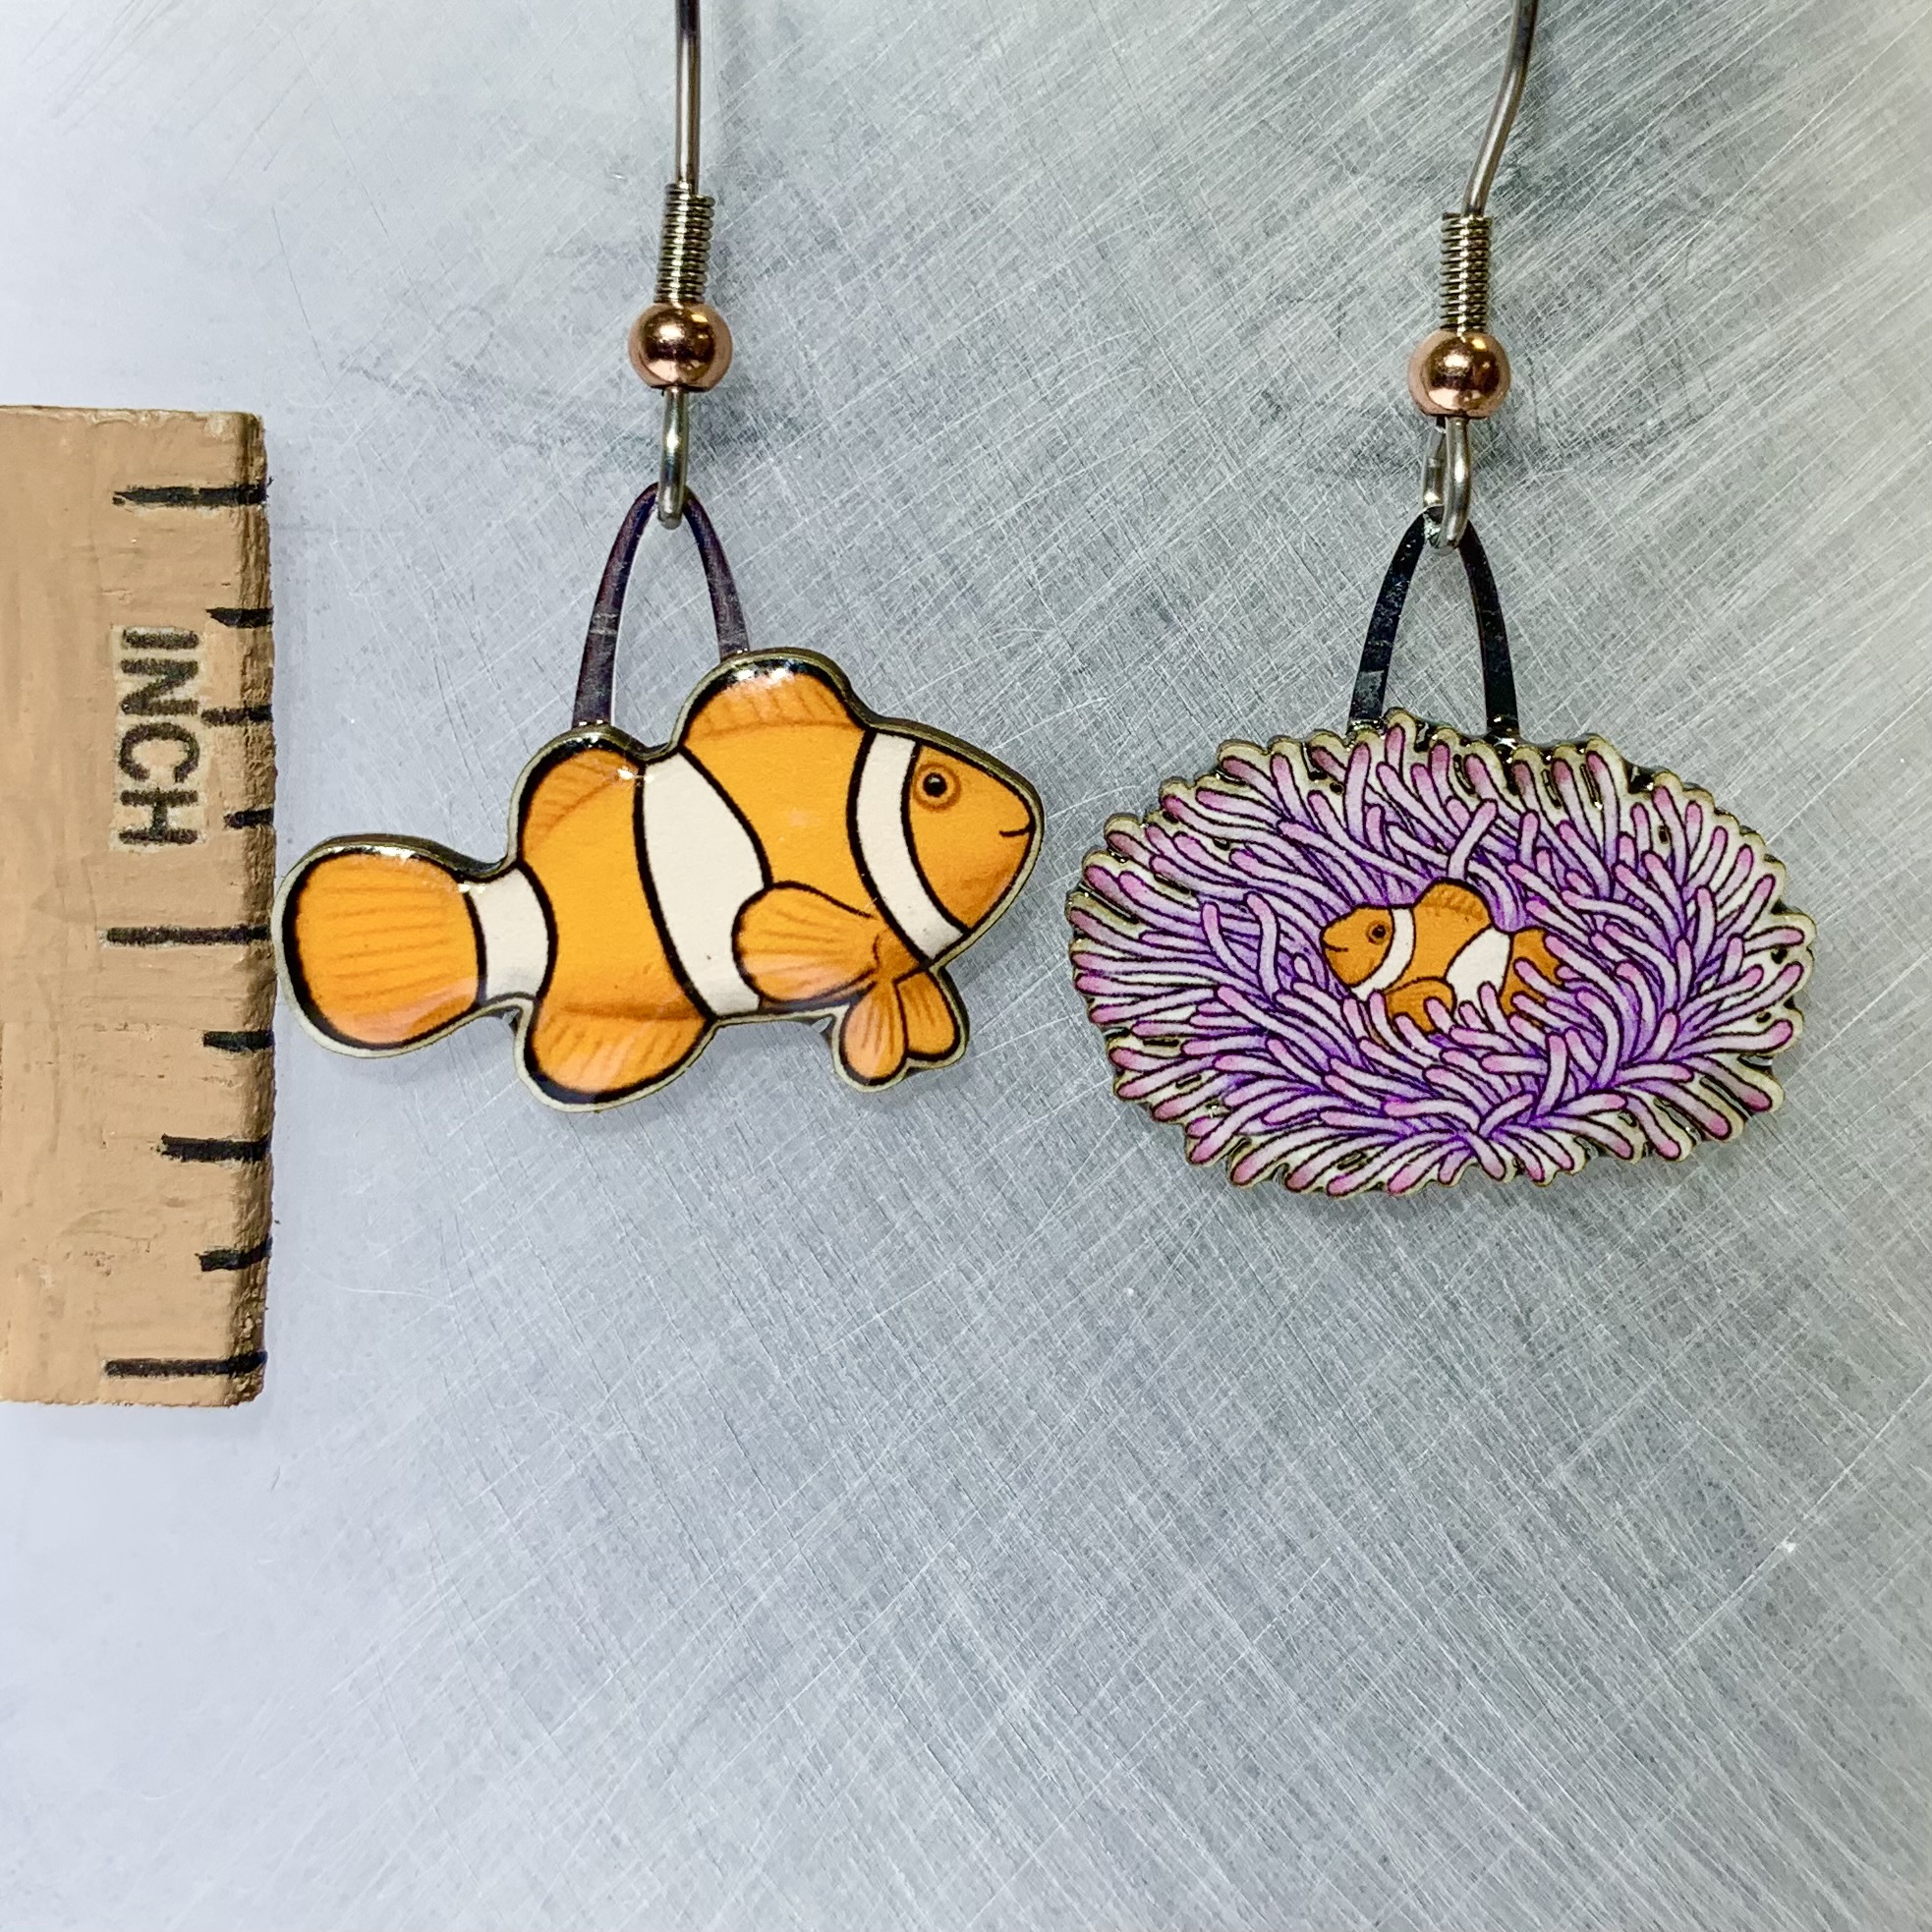 Picture shown is of 1 inch tall pair of earrings of the fish the Clownfish.